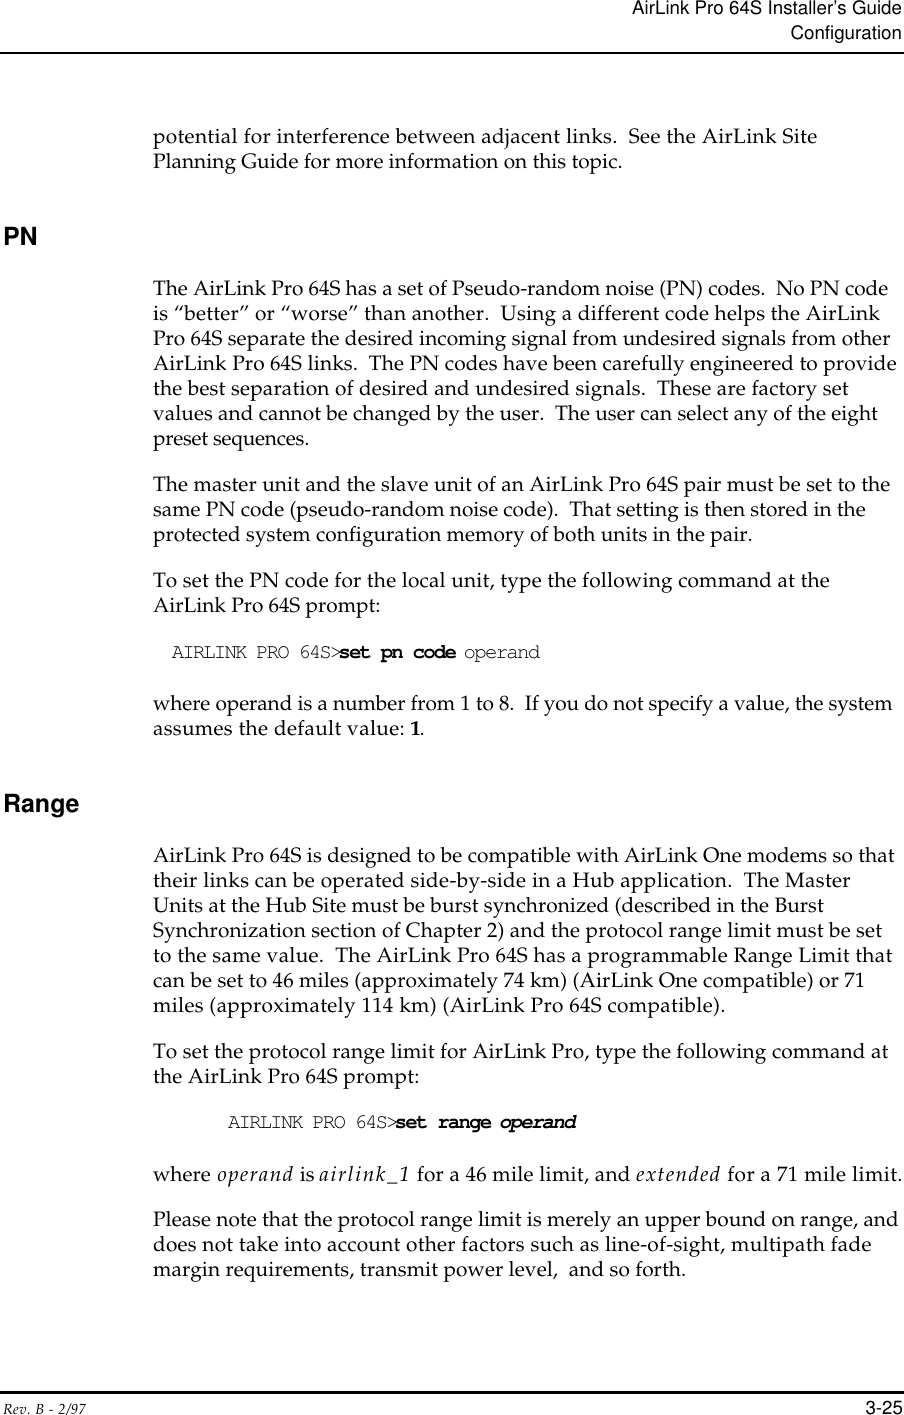 AirLink Pro 64S Installer’s GuideConfigurationRev. B - 2/97 3-25potential for interference between adjacent links.  See the AirLink SitePlanning Guide for more information on this topic.PNThe AirLink Pro 64S has a set of Pseudo-random noise (PN) codes.  No PN codeis “better” or “worse” than another.  Using a different code helps the AirLinkPro 64S separate the desired incoming signal from undesired signals from otherAirLink Pro 64S links.  The PN codes have been carefully engineered to providethe best separation of desired and undesired signals.  These are factory setvalues and cannot be changed by the user.  The user can select any of the eightpreset sequences.The master unit and the slave unit of an AirLink Pro 64S pair must be set to thesame PN code (pseudo-random noise code).  That setting is then stored in theprotected system configuration memory of both units in the pair.To set the PN code for the local unit, type the following command at theAirLink Pro 64S prompt:AIRLINK PRO 64S&gt;set pn code operandwhere operand is a number from 1 to 8.  If you do not specify a value, the systemassumes the default value: 1.RangeAirLink Pro 64S is designed to be compatible with AirLink One modems so thattheir links can be operated side-by-side in a Hub application.  The MasterUnits at the Hub Site must be burst synchronized (described in the BurstSynchronization section of Chapter 2) and the protocol range limit must be setto the same value.  The AirLink Pro 64S has a programmable Range Limit thatcan be set to 46 miles (approximately 74 km) (AirLink One compatible) or 71miles (approximately 114 km) (AirLink Pro 64S compatible).To set the protocol range limit for AirLink Pro, type the following command atthe AirLink Pro 64S prompt:AIRLINK PRO 64S&gt;set range operandwhere operand is airlink_1 for a 46 mile limit, and extended for a 71 mile limit.Please note that the protocol range limit is merely an upper bound on range, anddoes not take into account other factors such as line-of-sight, multipath fademargin requirements, transmit power level,  and so forth.